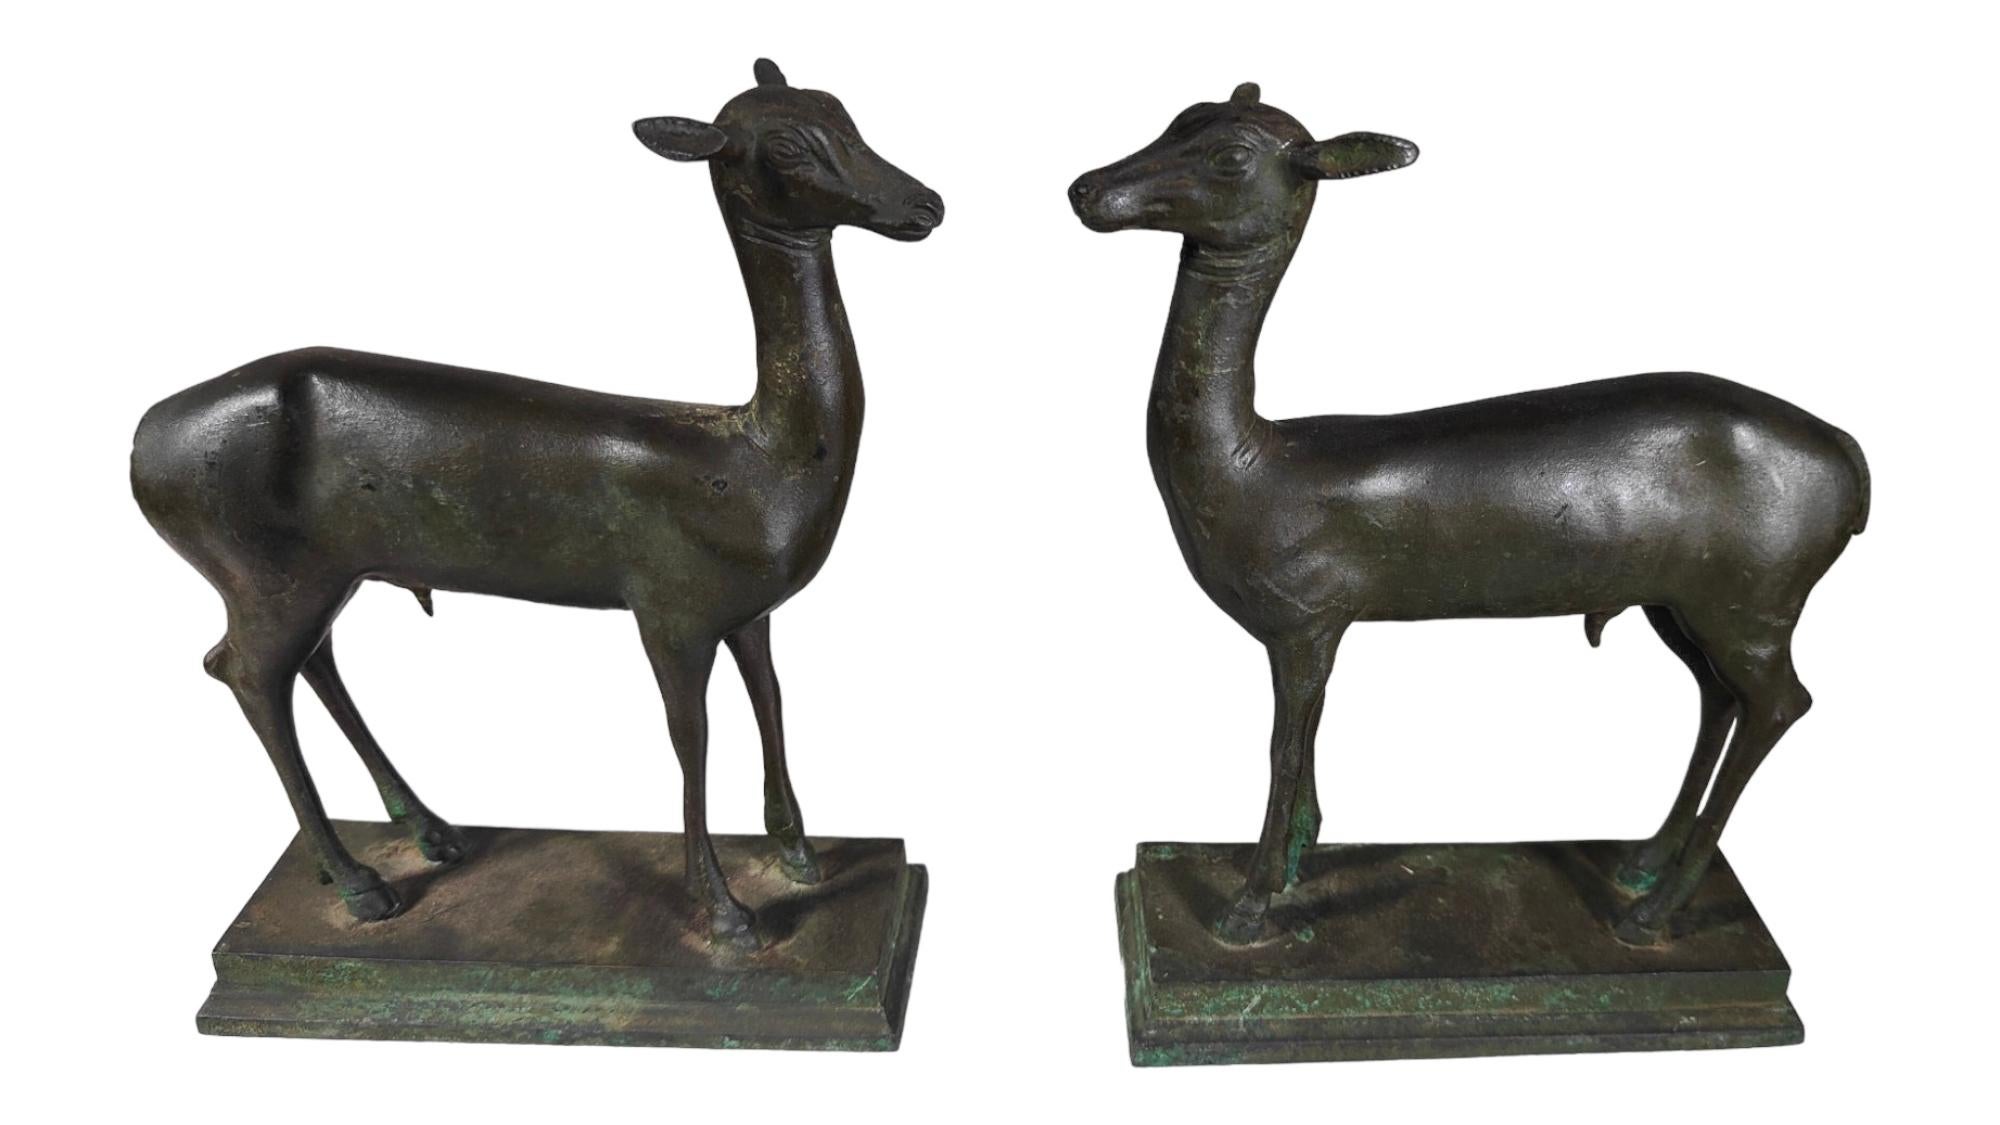 Pair Of Miniature Pompeian Deer From Herculaneum
Pair of young deer after the antique. Patinated bronze. Early 20th century. This miniature pair of young stags is a reproduction of the one kept in the Archaeological Museum of Naples under the